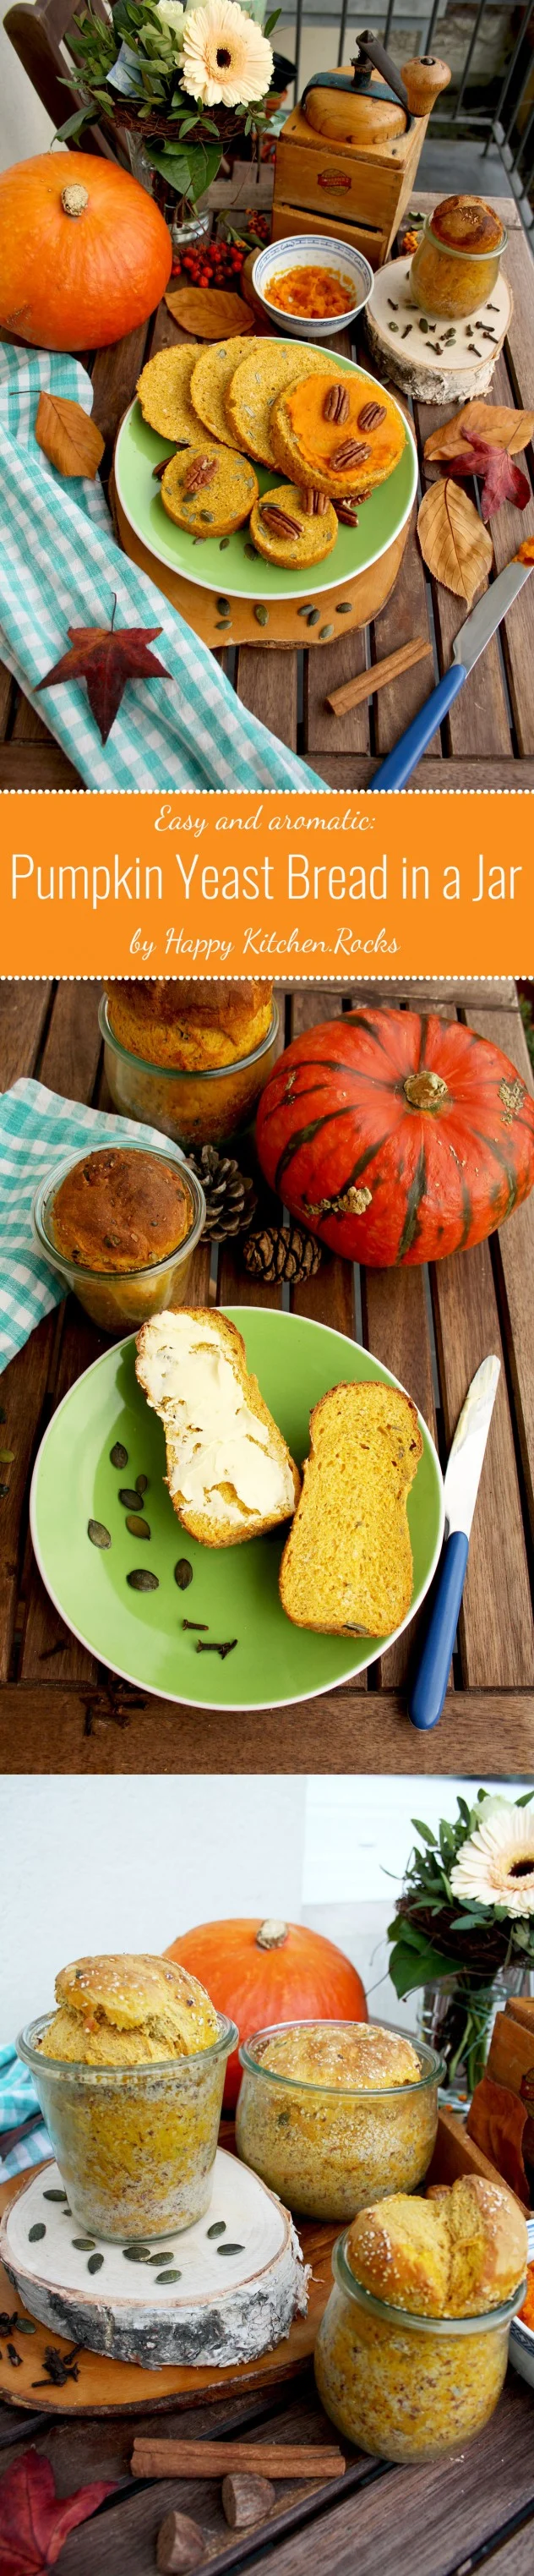 Pumpkin Yeast Bread in a Jar: easy and aromatic pumpkin bread that can be preserved for later. Great homemade gift idea for holidays for your loved ones! width=